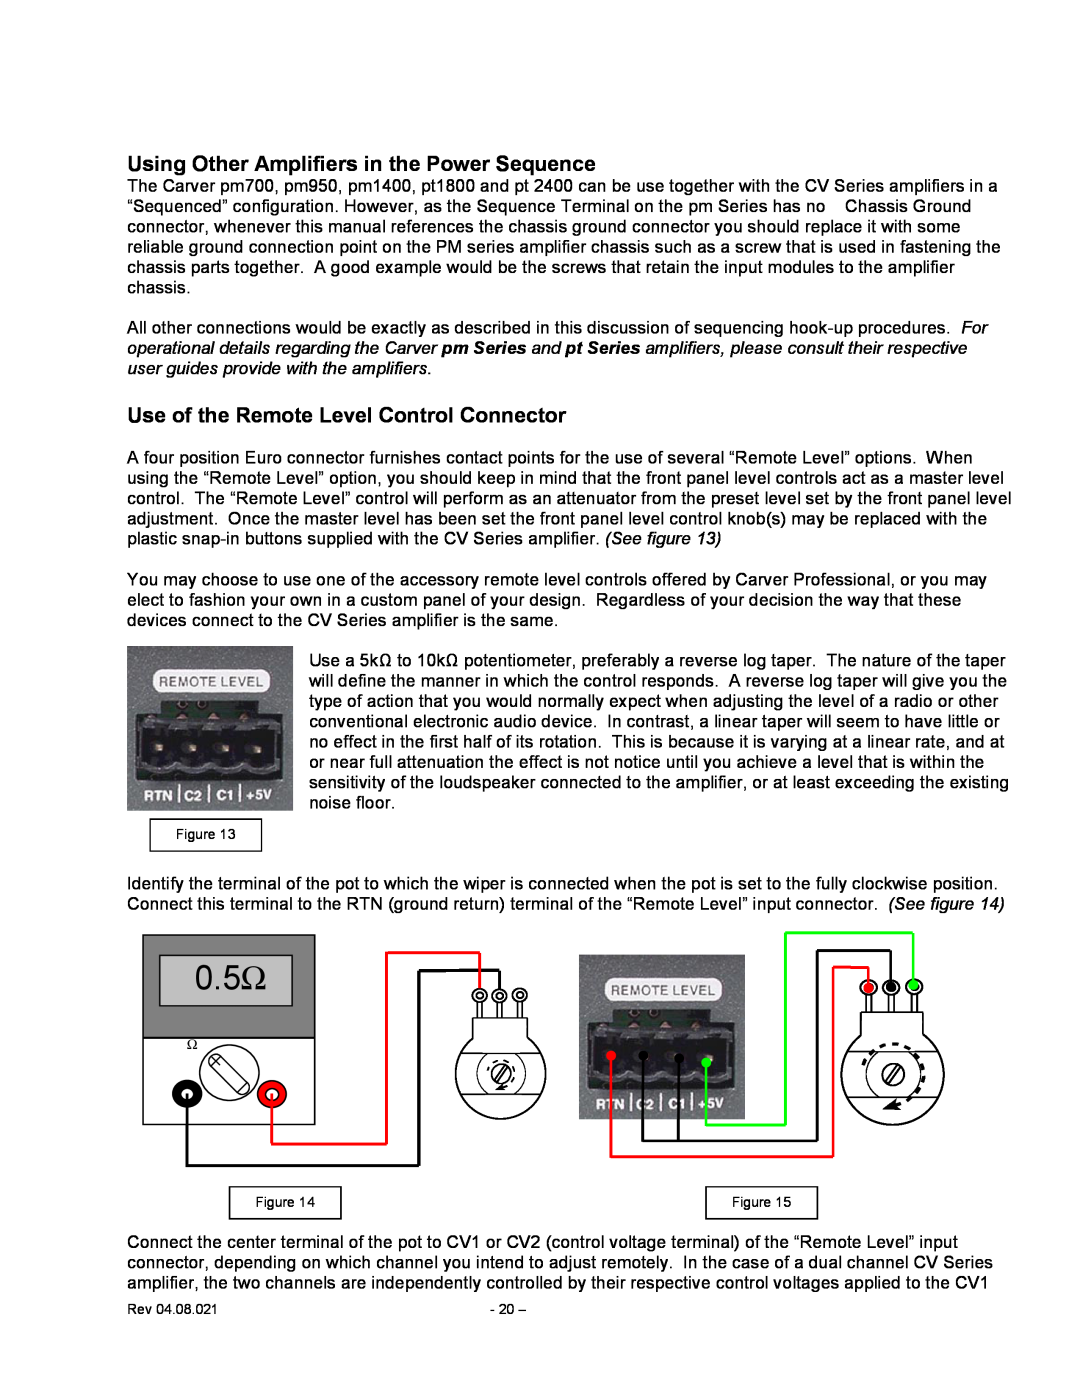 Carver CV Series user manual 0.5Ω, Using Other Amplifiers in the Power Sequence, Use of the Remote Level Control Connector 